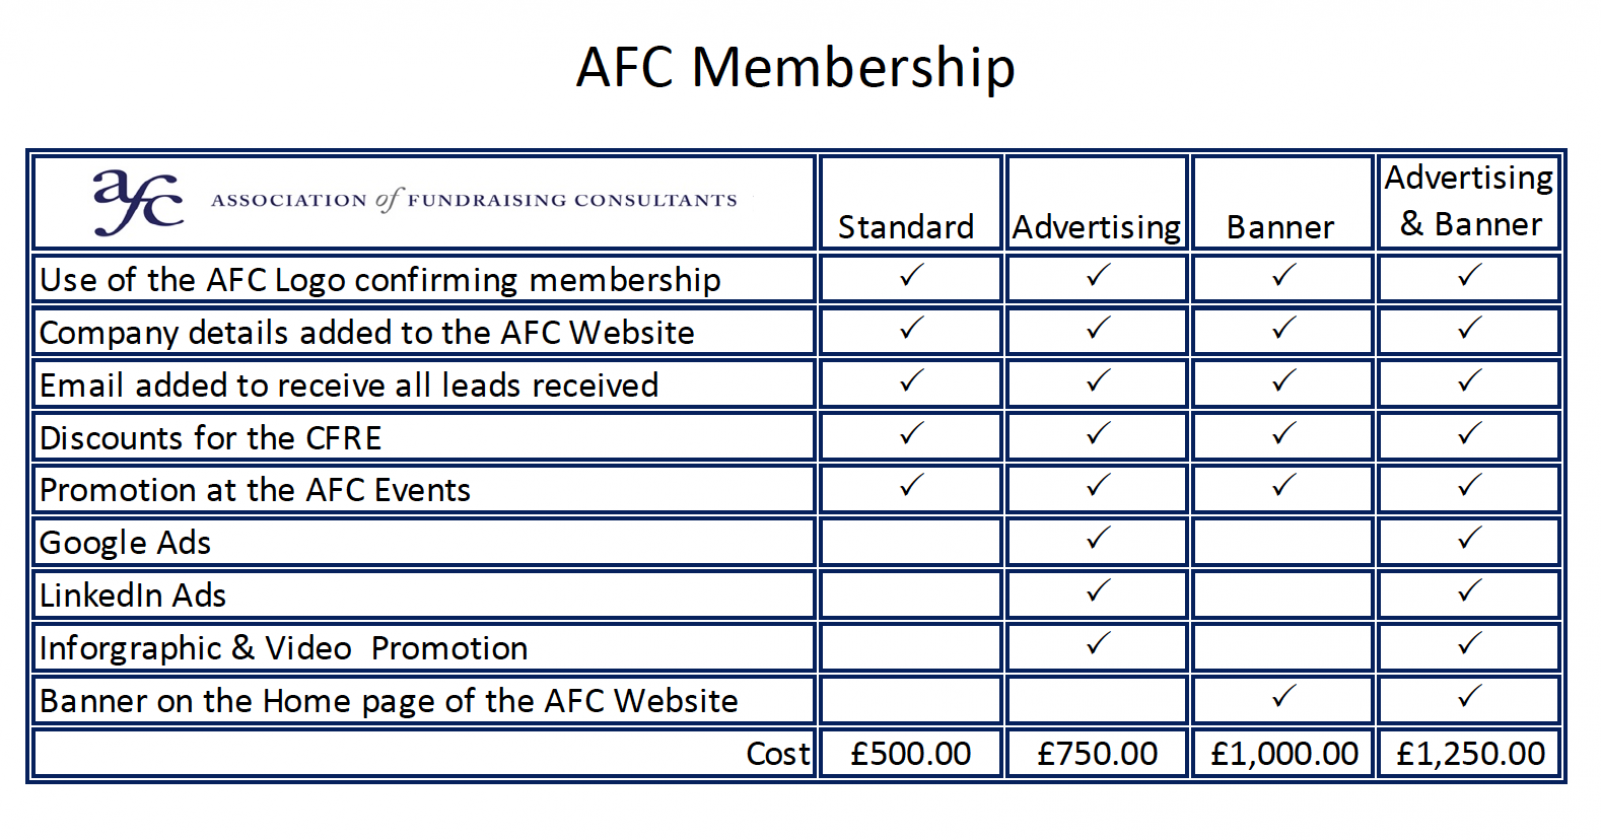 Membership for the AFC